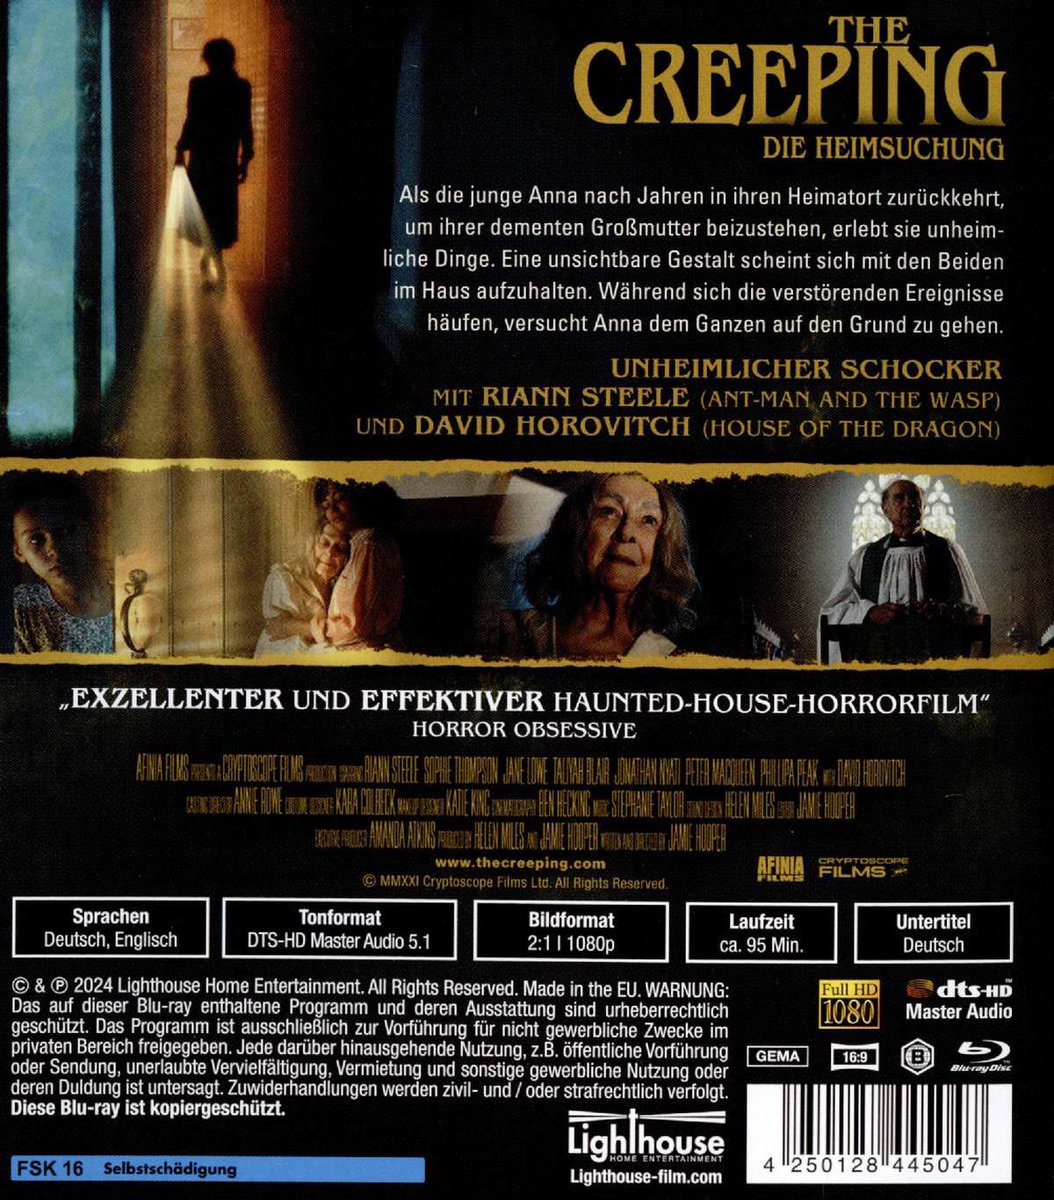 We’re excited to say THE CREEPING is now available on Blu-ray and DVD in Germany. You can have a physical copy of the film on your shelf.🎉👻

lighthouse-film.com/video/the-cree… #TheCreeping